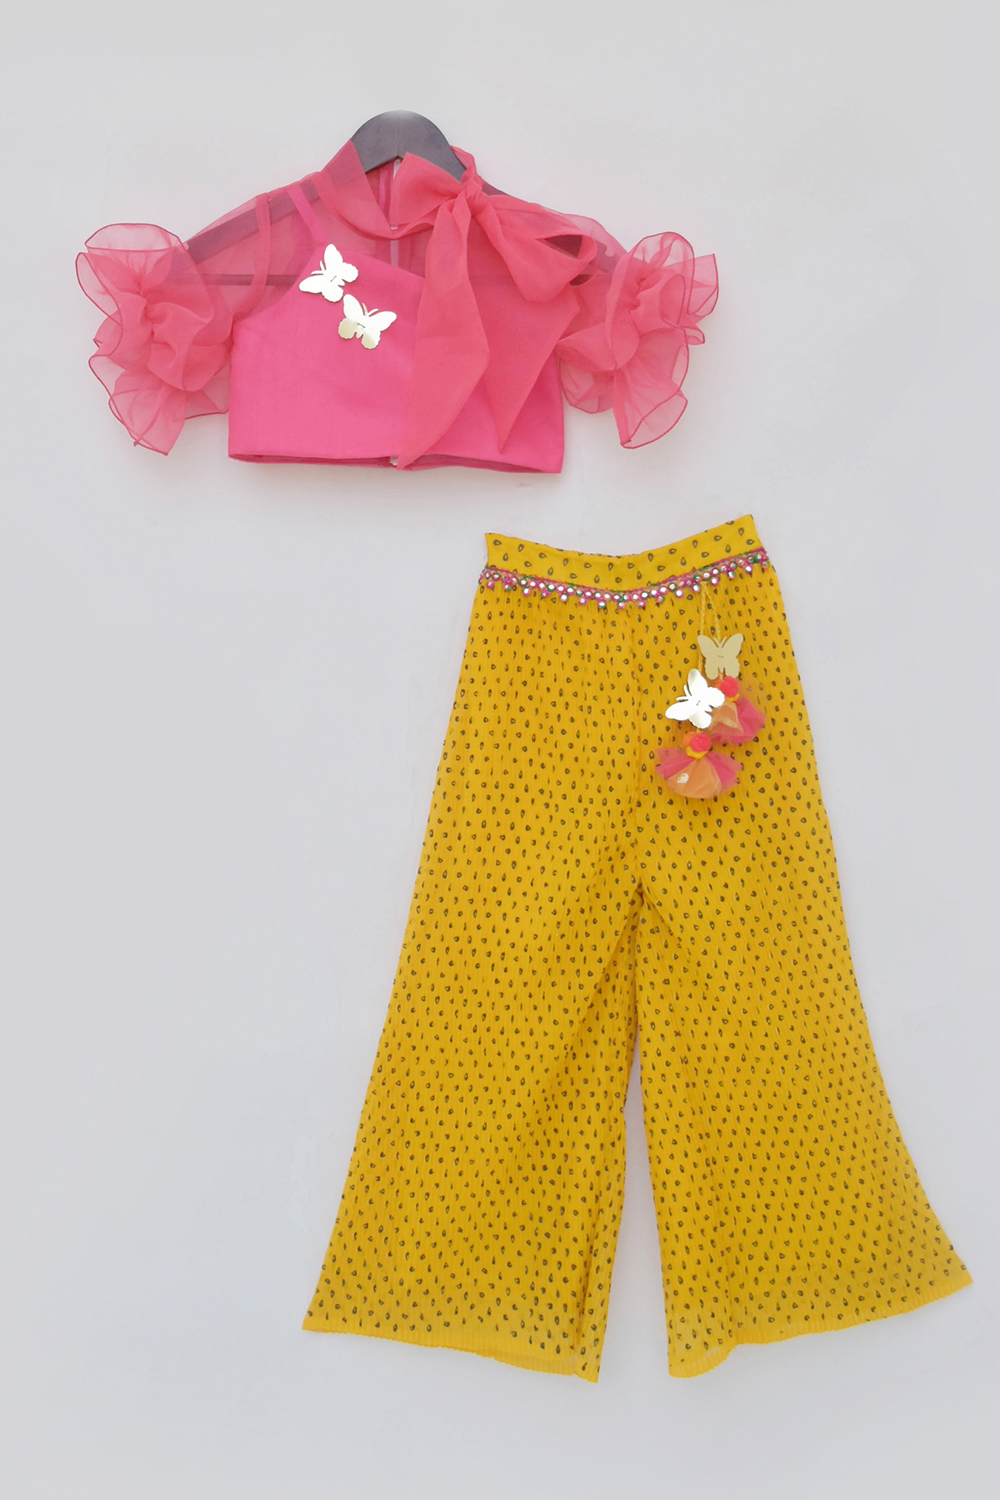 Hot Pink Top With Yellow Pants